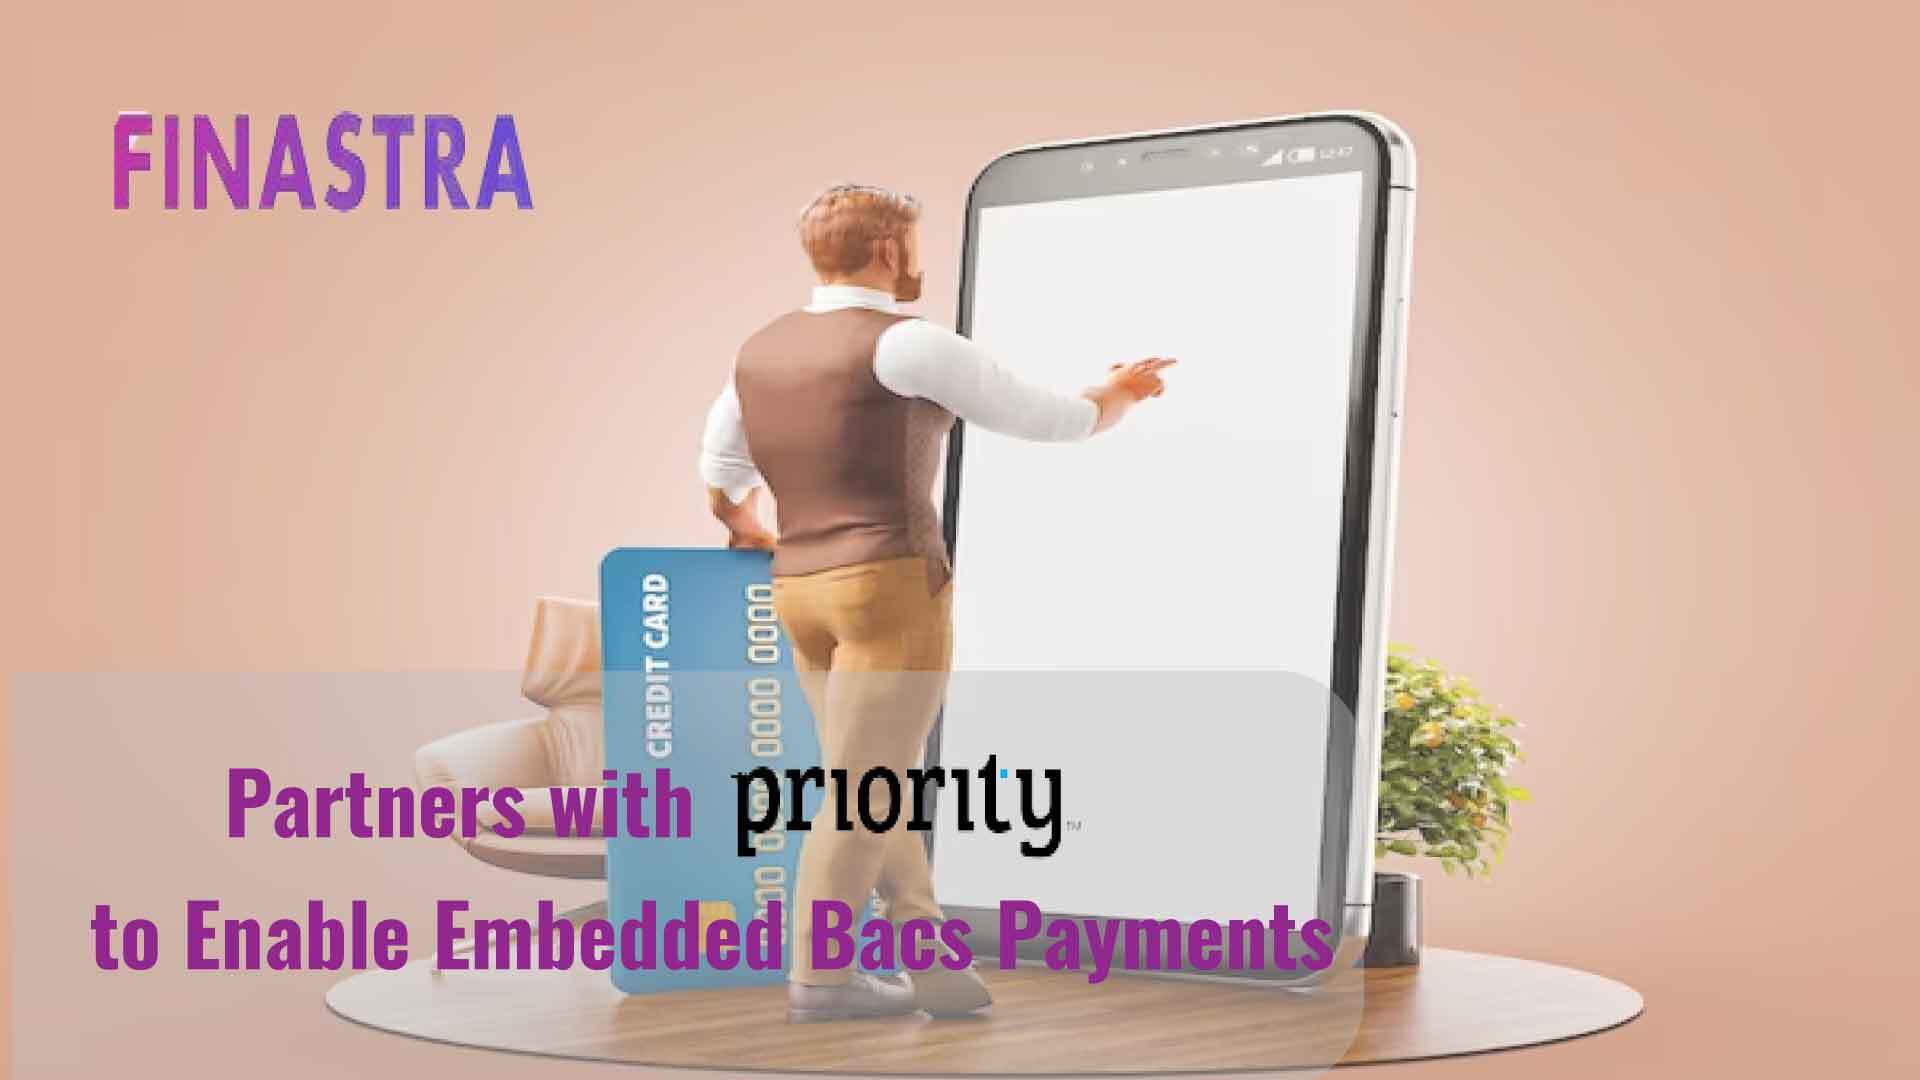 Finastra integrates with Priority Software to enable embedded Bacs payments